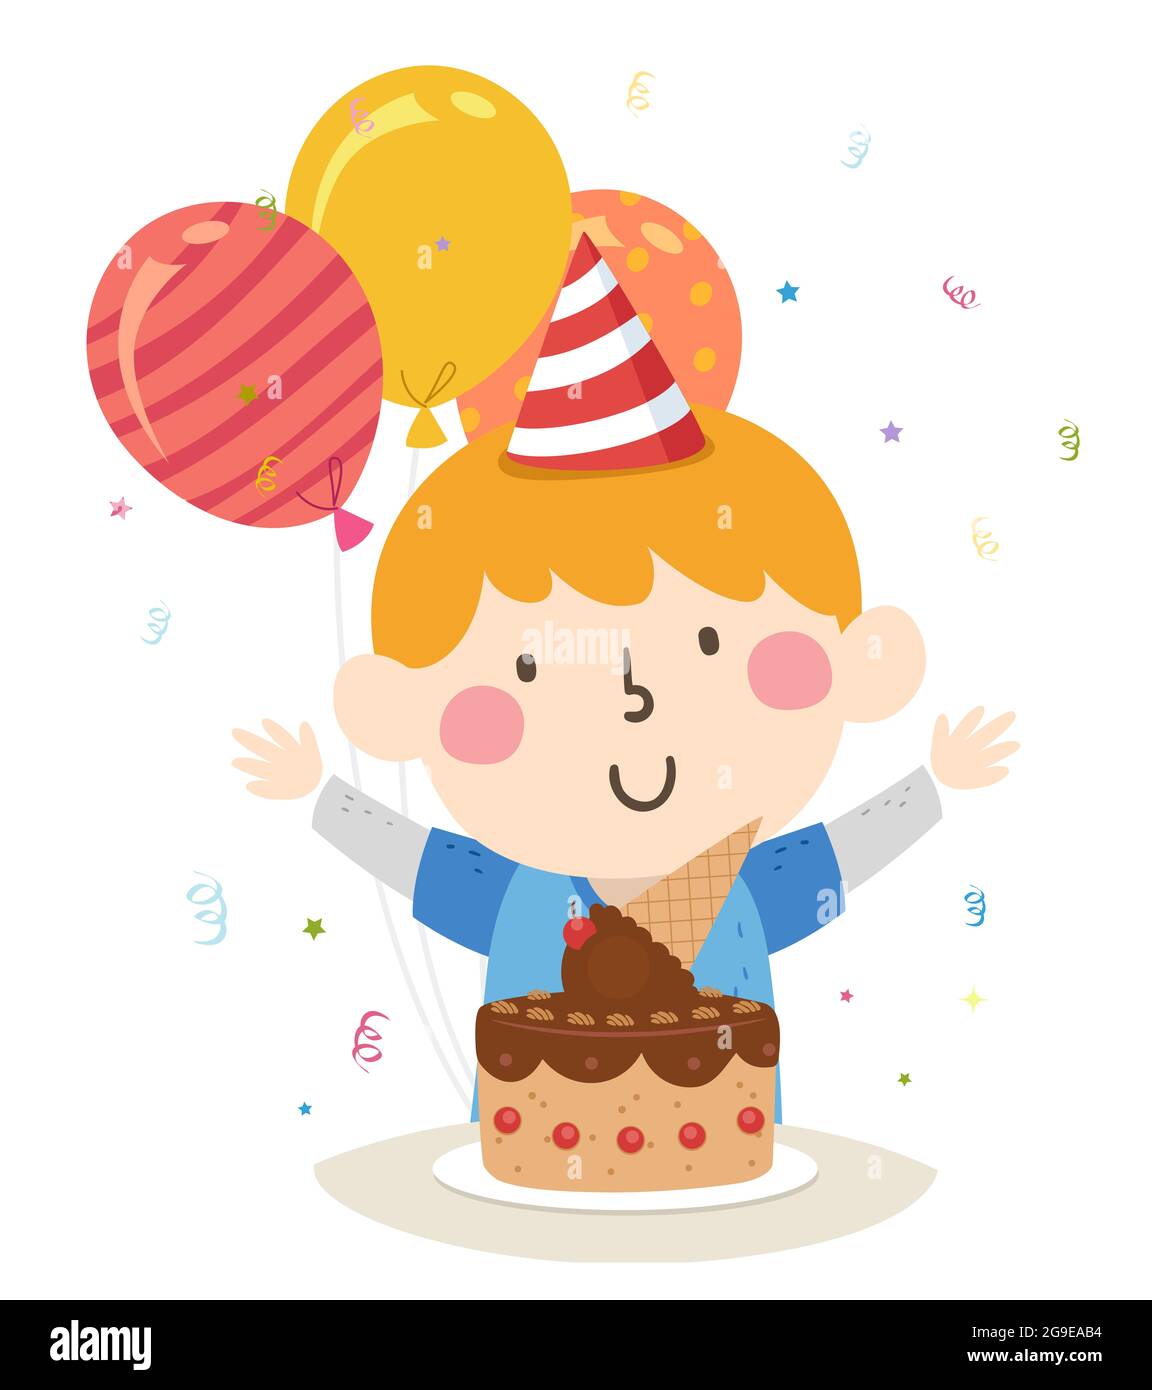 Illustration of a Happy Kid Boy with Ice Cream Cake, Wearing Birthday Hat, with Balloons and Confetti Stock Photo